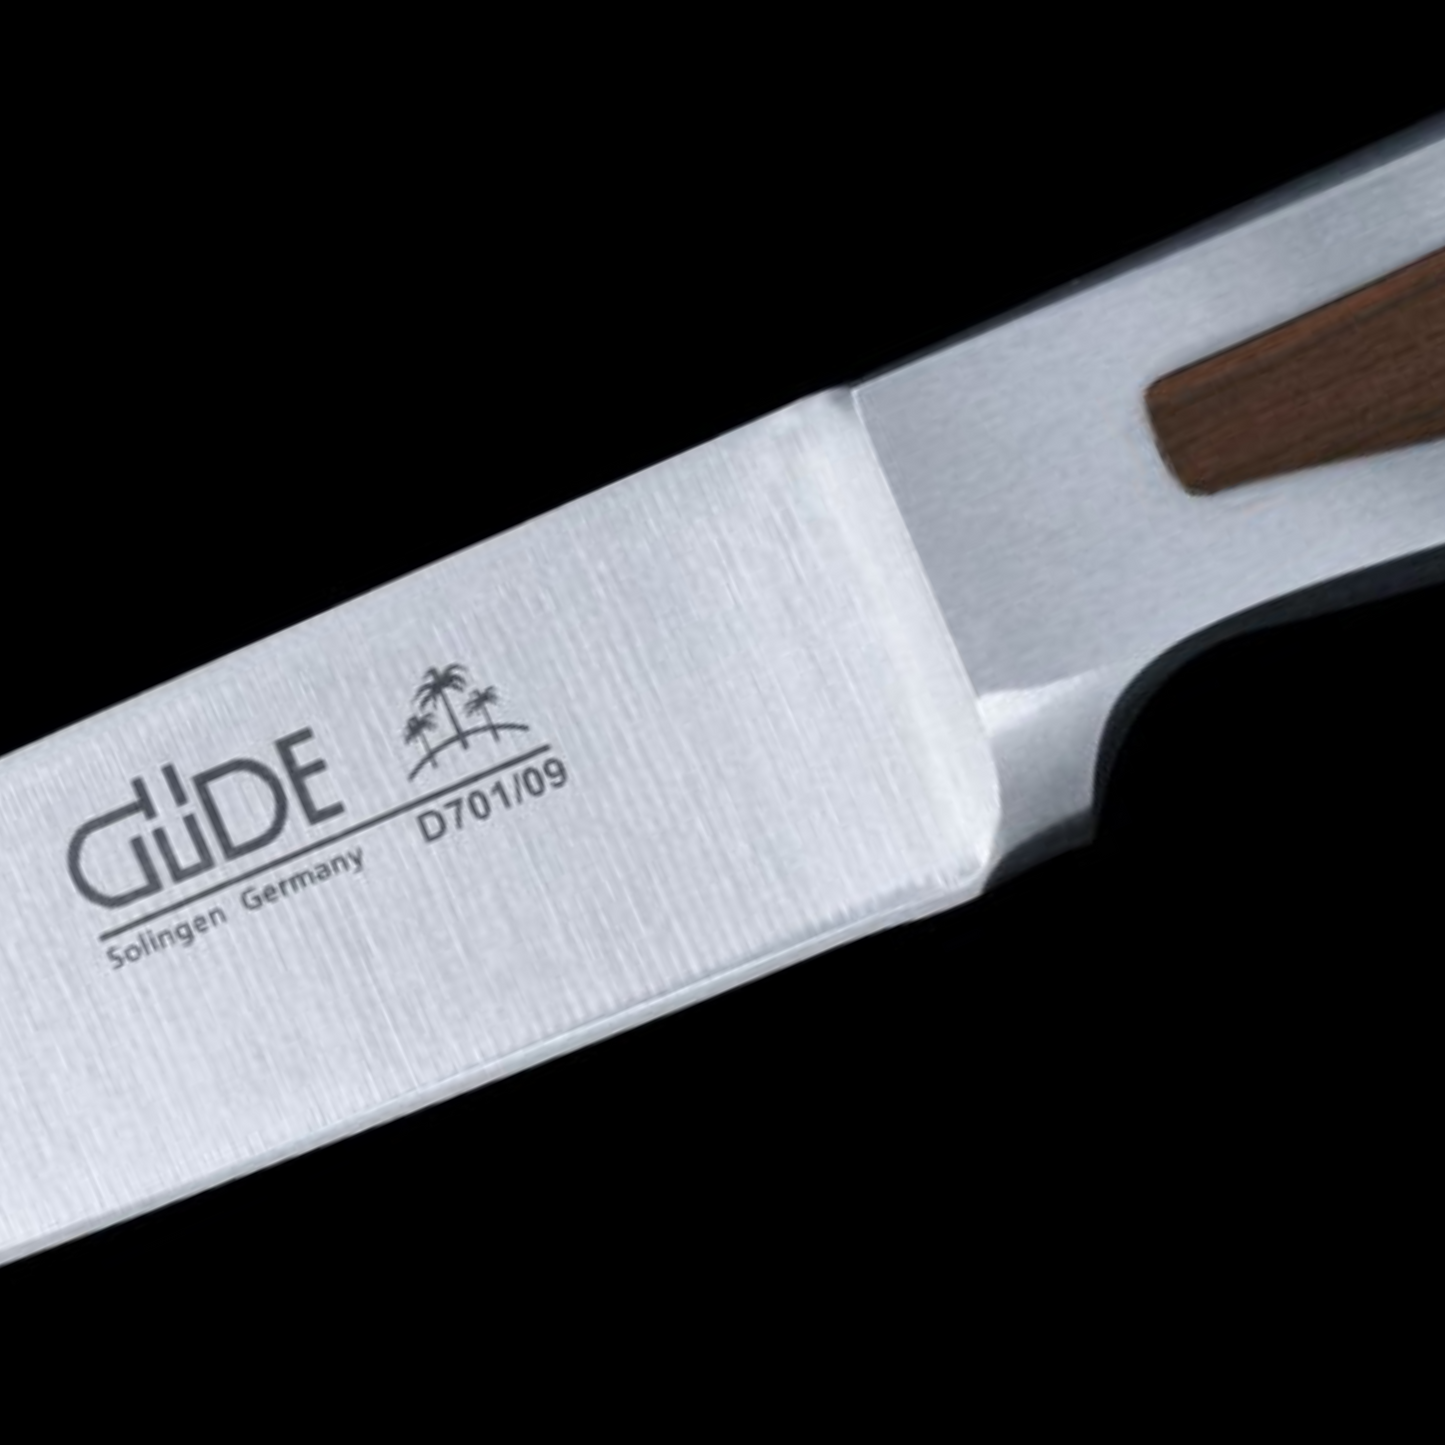 Gude Delta Series Forged Double Holster Utility Knife 3", African Black Wood Handle - GuedeUSA